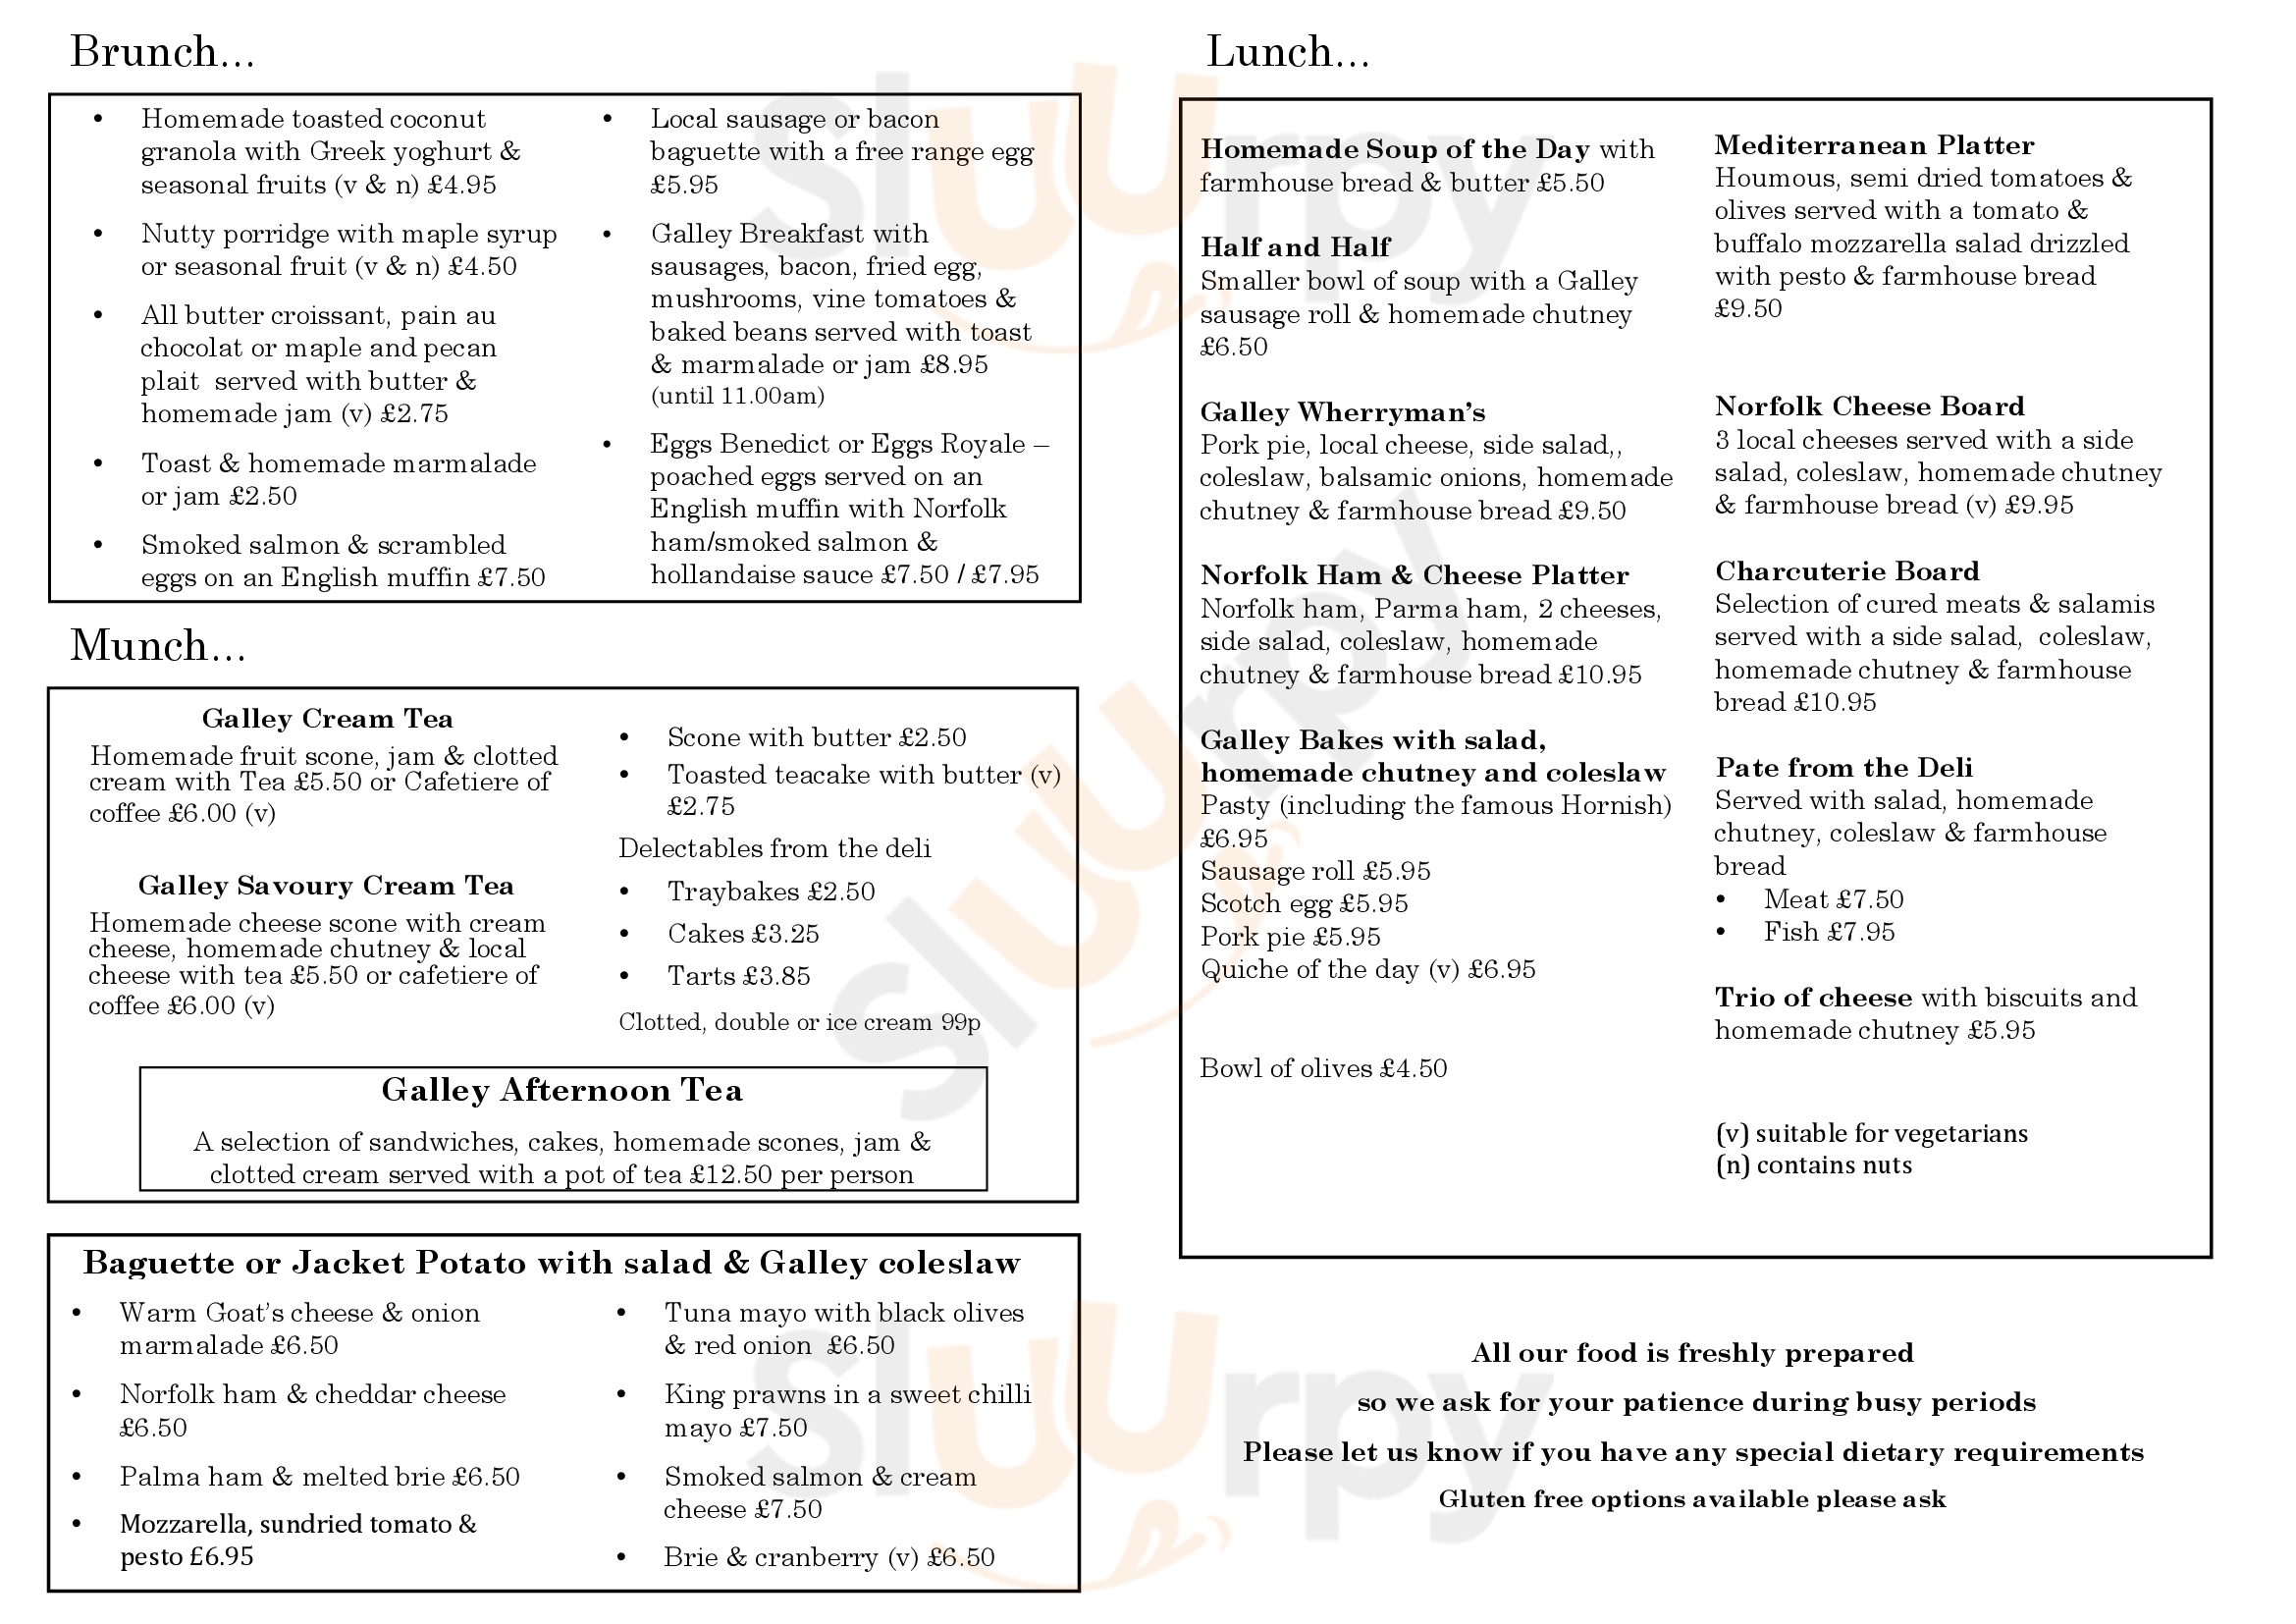 The Galley Horning Menu - 1